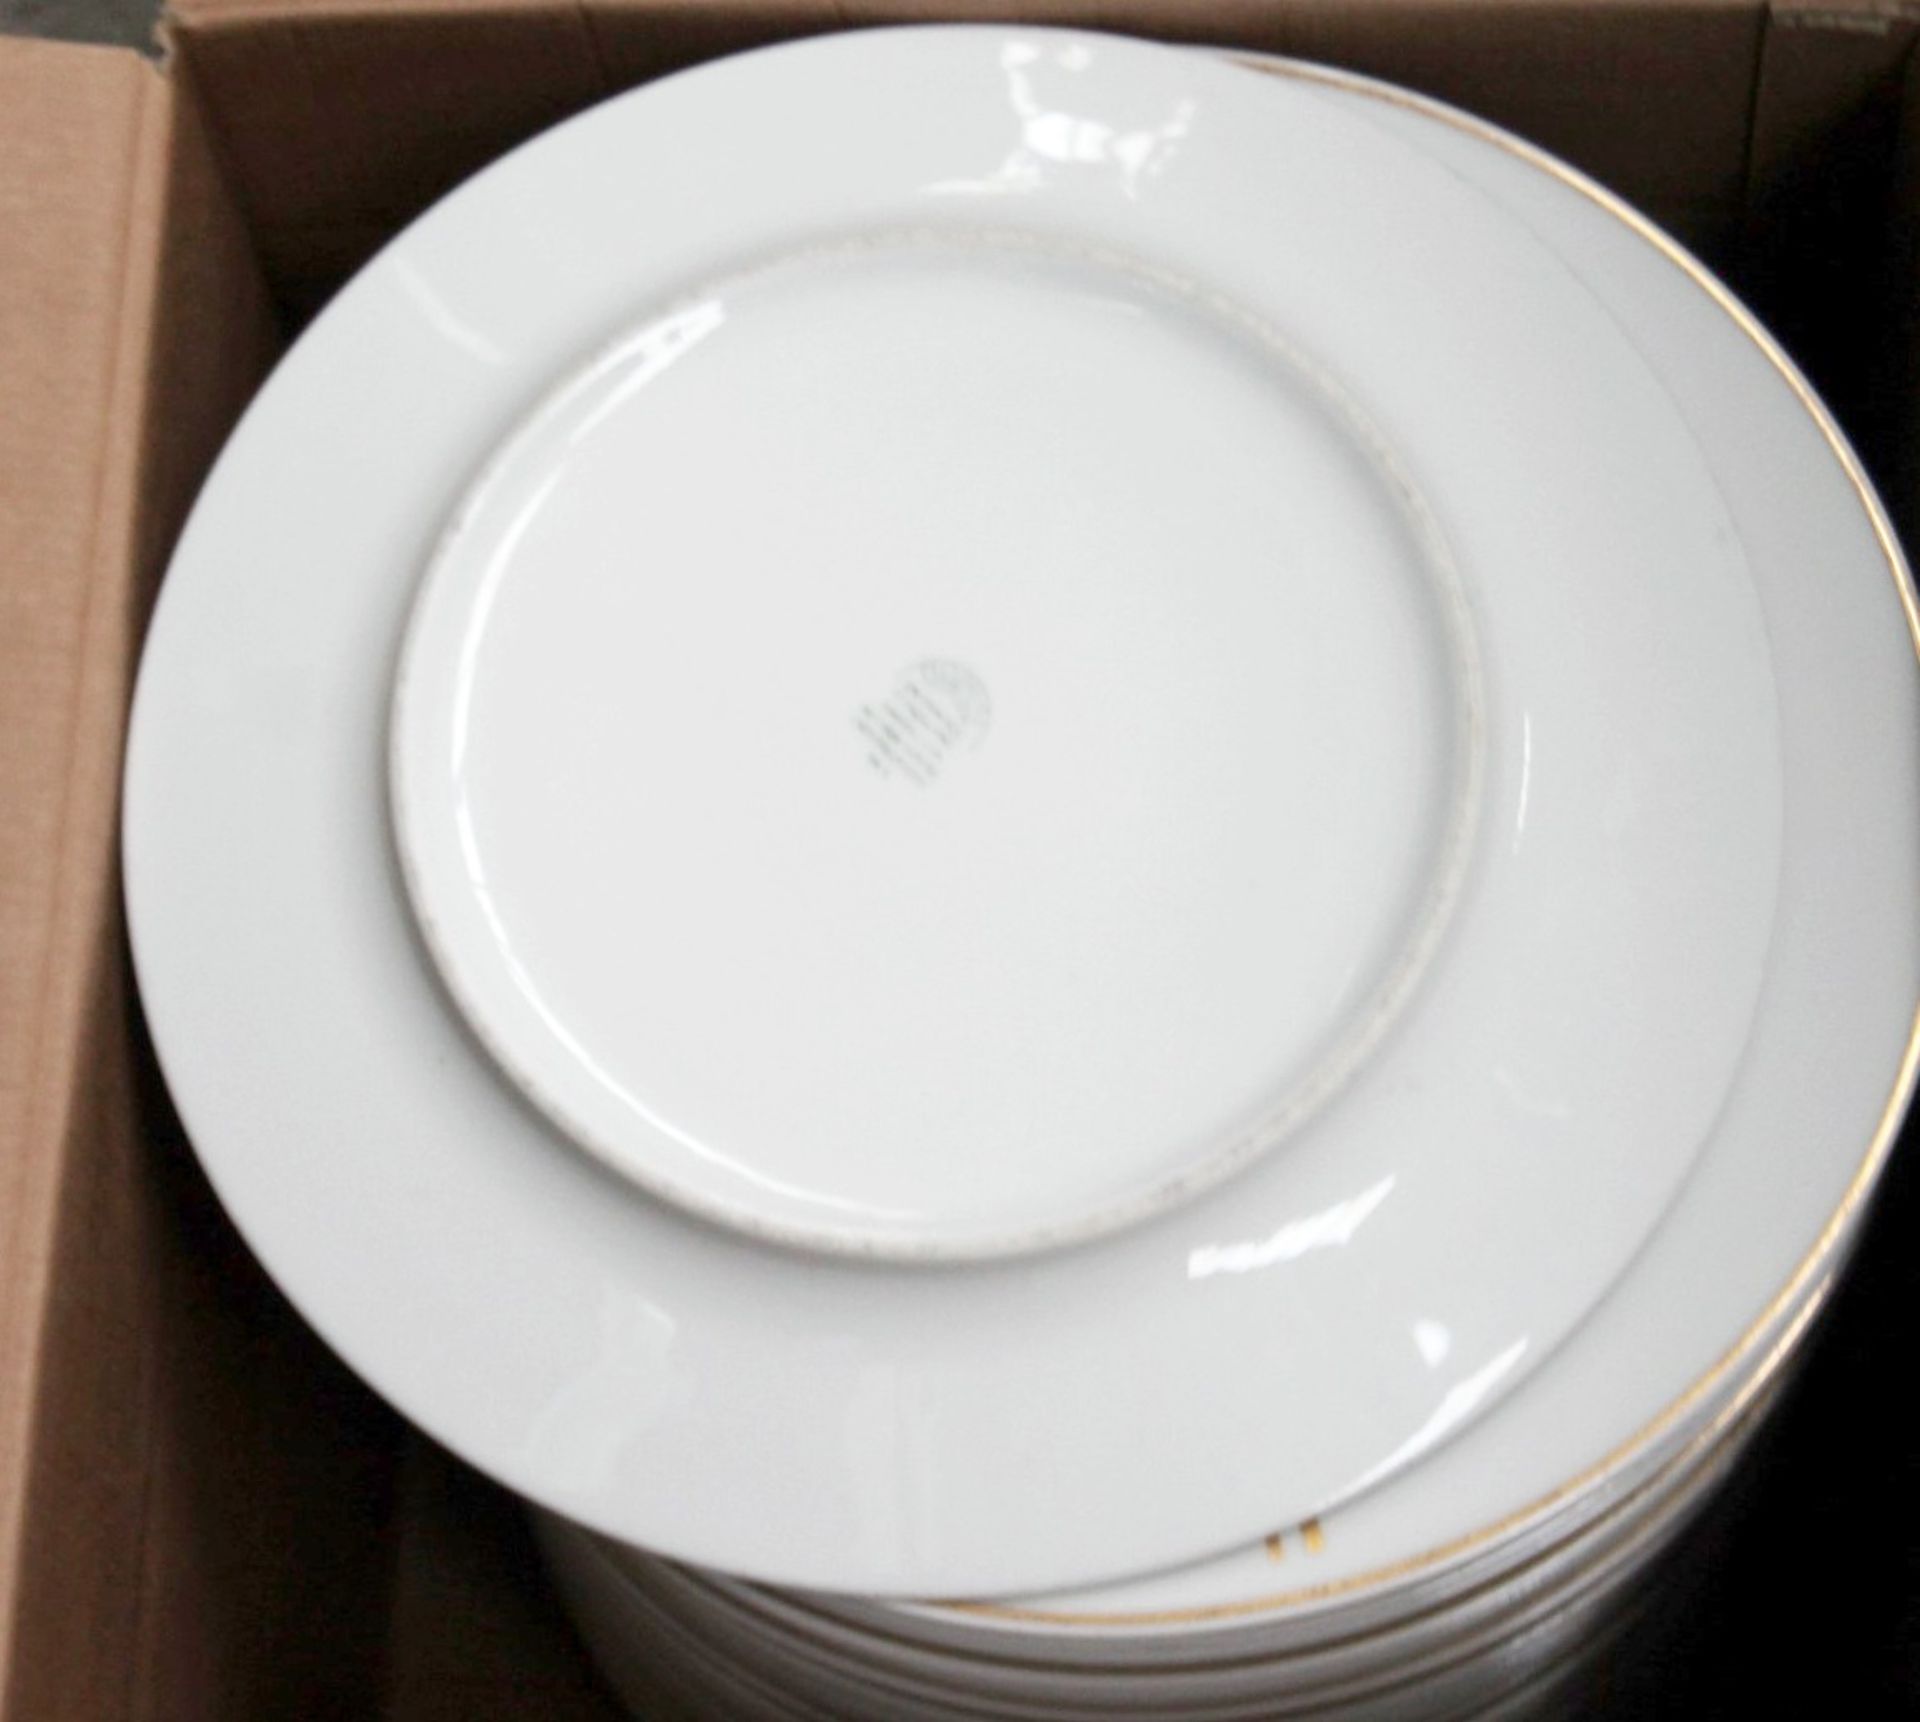 25 x PILLIVUYT Porcelain Dinner Plates In White Featuring 'Famous Branding' In Gold - Dimensions: - Image 2 of 5